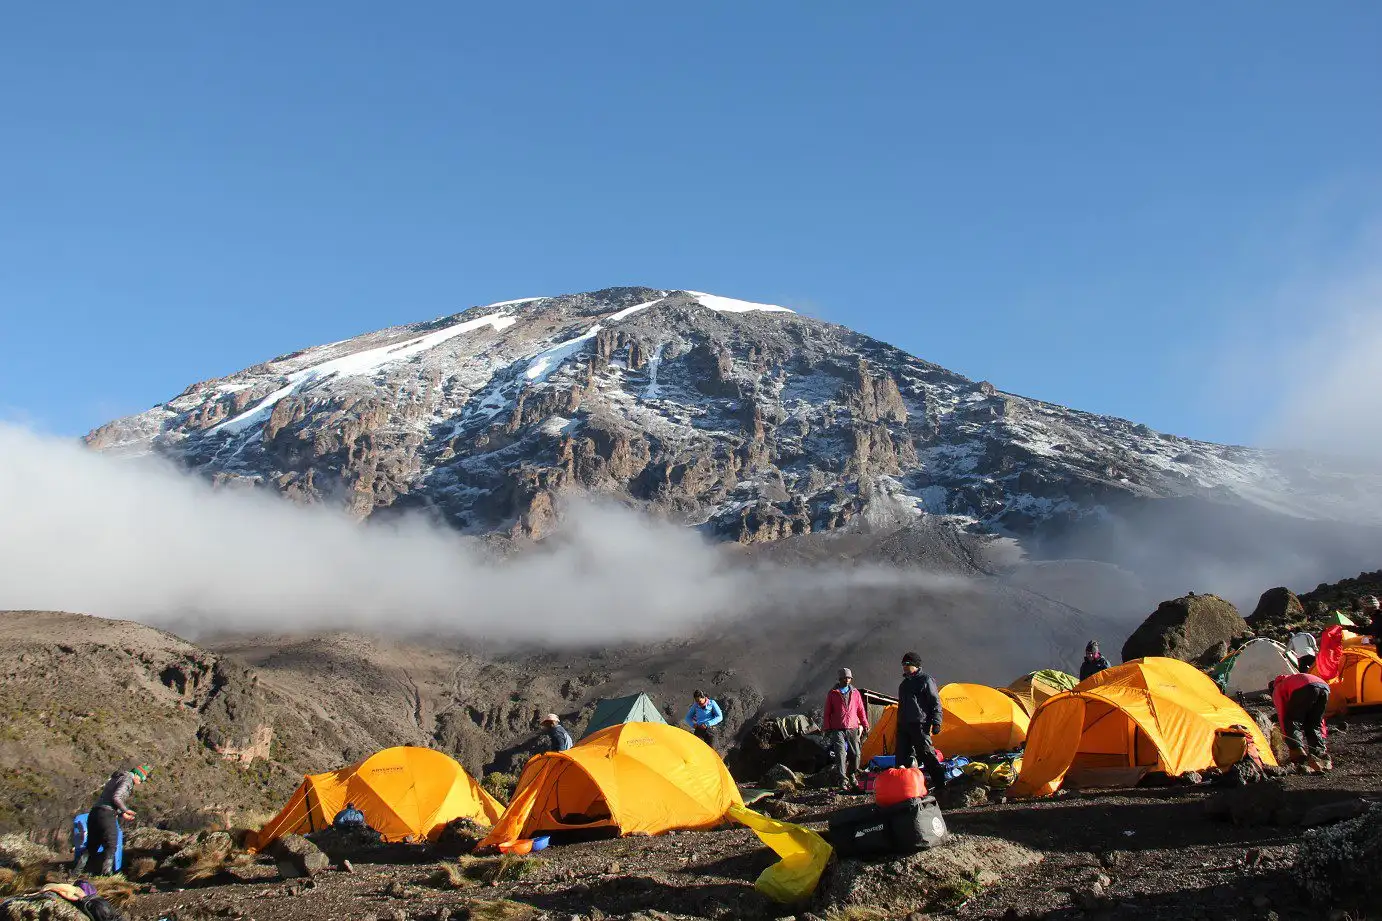 Lemosho Route 7 days Itinerary, Prices & Dates, What Is The Best Down Jacket For Climbing Kilimanjaro? 10 Reasons Why You Can't Climb Mt Kilimanjaro in a Day, Kilimanjaro Experience | Highest Mountain in Africa, Oldest Person To Climb Kilimanjaro, Best Tour Operators in Tanzania, 6 Days Shira route, How high is Mount Kilimanjaro? Everything you need to know, The 10 Biggest Misconceptions About Climbing Kilimanjaro, Do I Need a Camp Pillow for Climbing Kilimanjaro, Kilimanjaro Climb and Safari Packages, How To Prepare For Climbing Mount Kilimanjaro, Food on Kilimanjaro, Which is Harder Inca Trail or Kilimanjaro? Kilimanjaro Inspiring Stories, Natural Foods and Supplements, Kilimanjaro Books That Transport You To The Roof Of Africa, Climbing Kilimanjaro in September, Why do prices differ between Kilimanjaro tour operators?, It is Important to Find Good Footwear for Kilimanjaro, What Plants and Trees Will I See on Mount Kilimanjaro?, How To Stay Warm On The Summit Of Kilimanjaro?, What is the Best Sleeping Bag for Climbing Kilimanjaro?